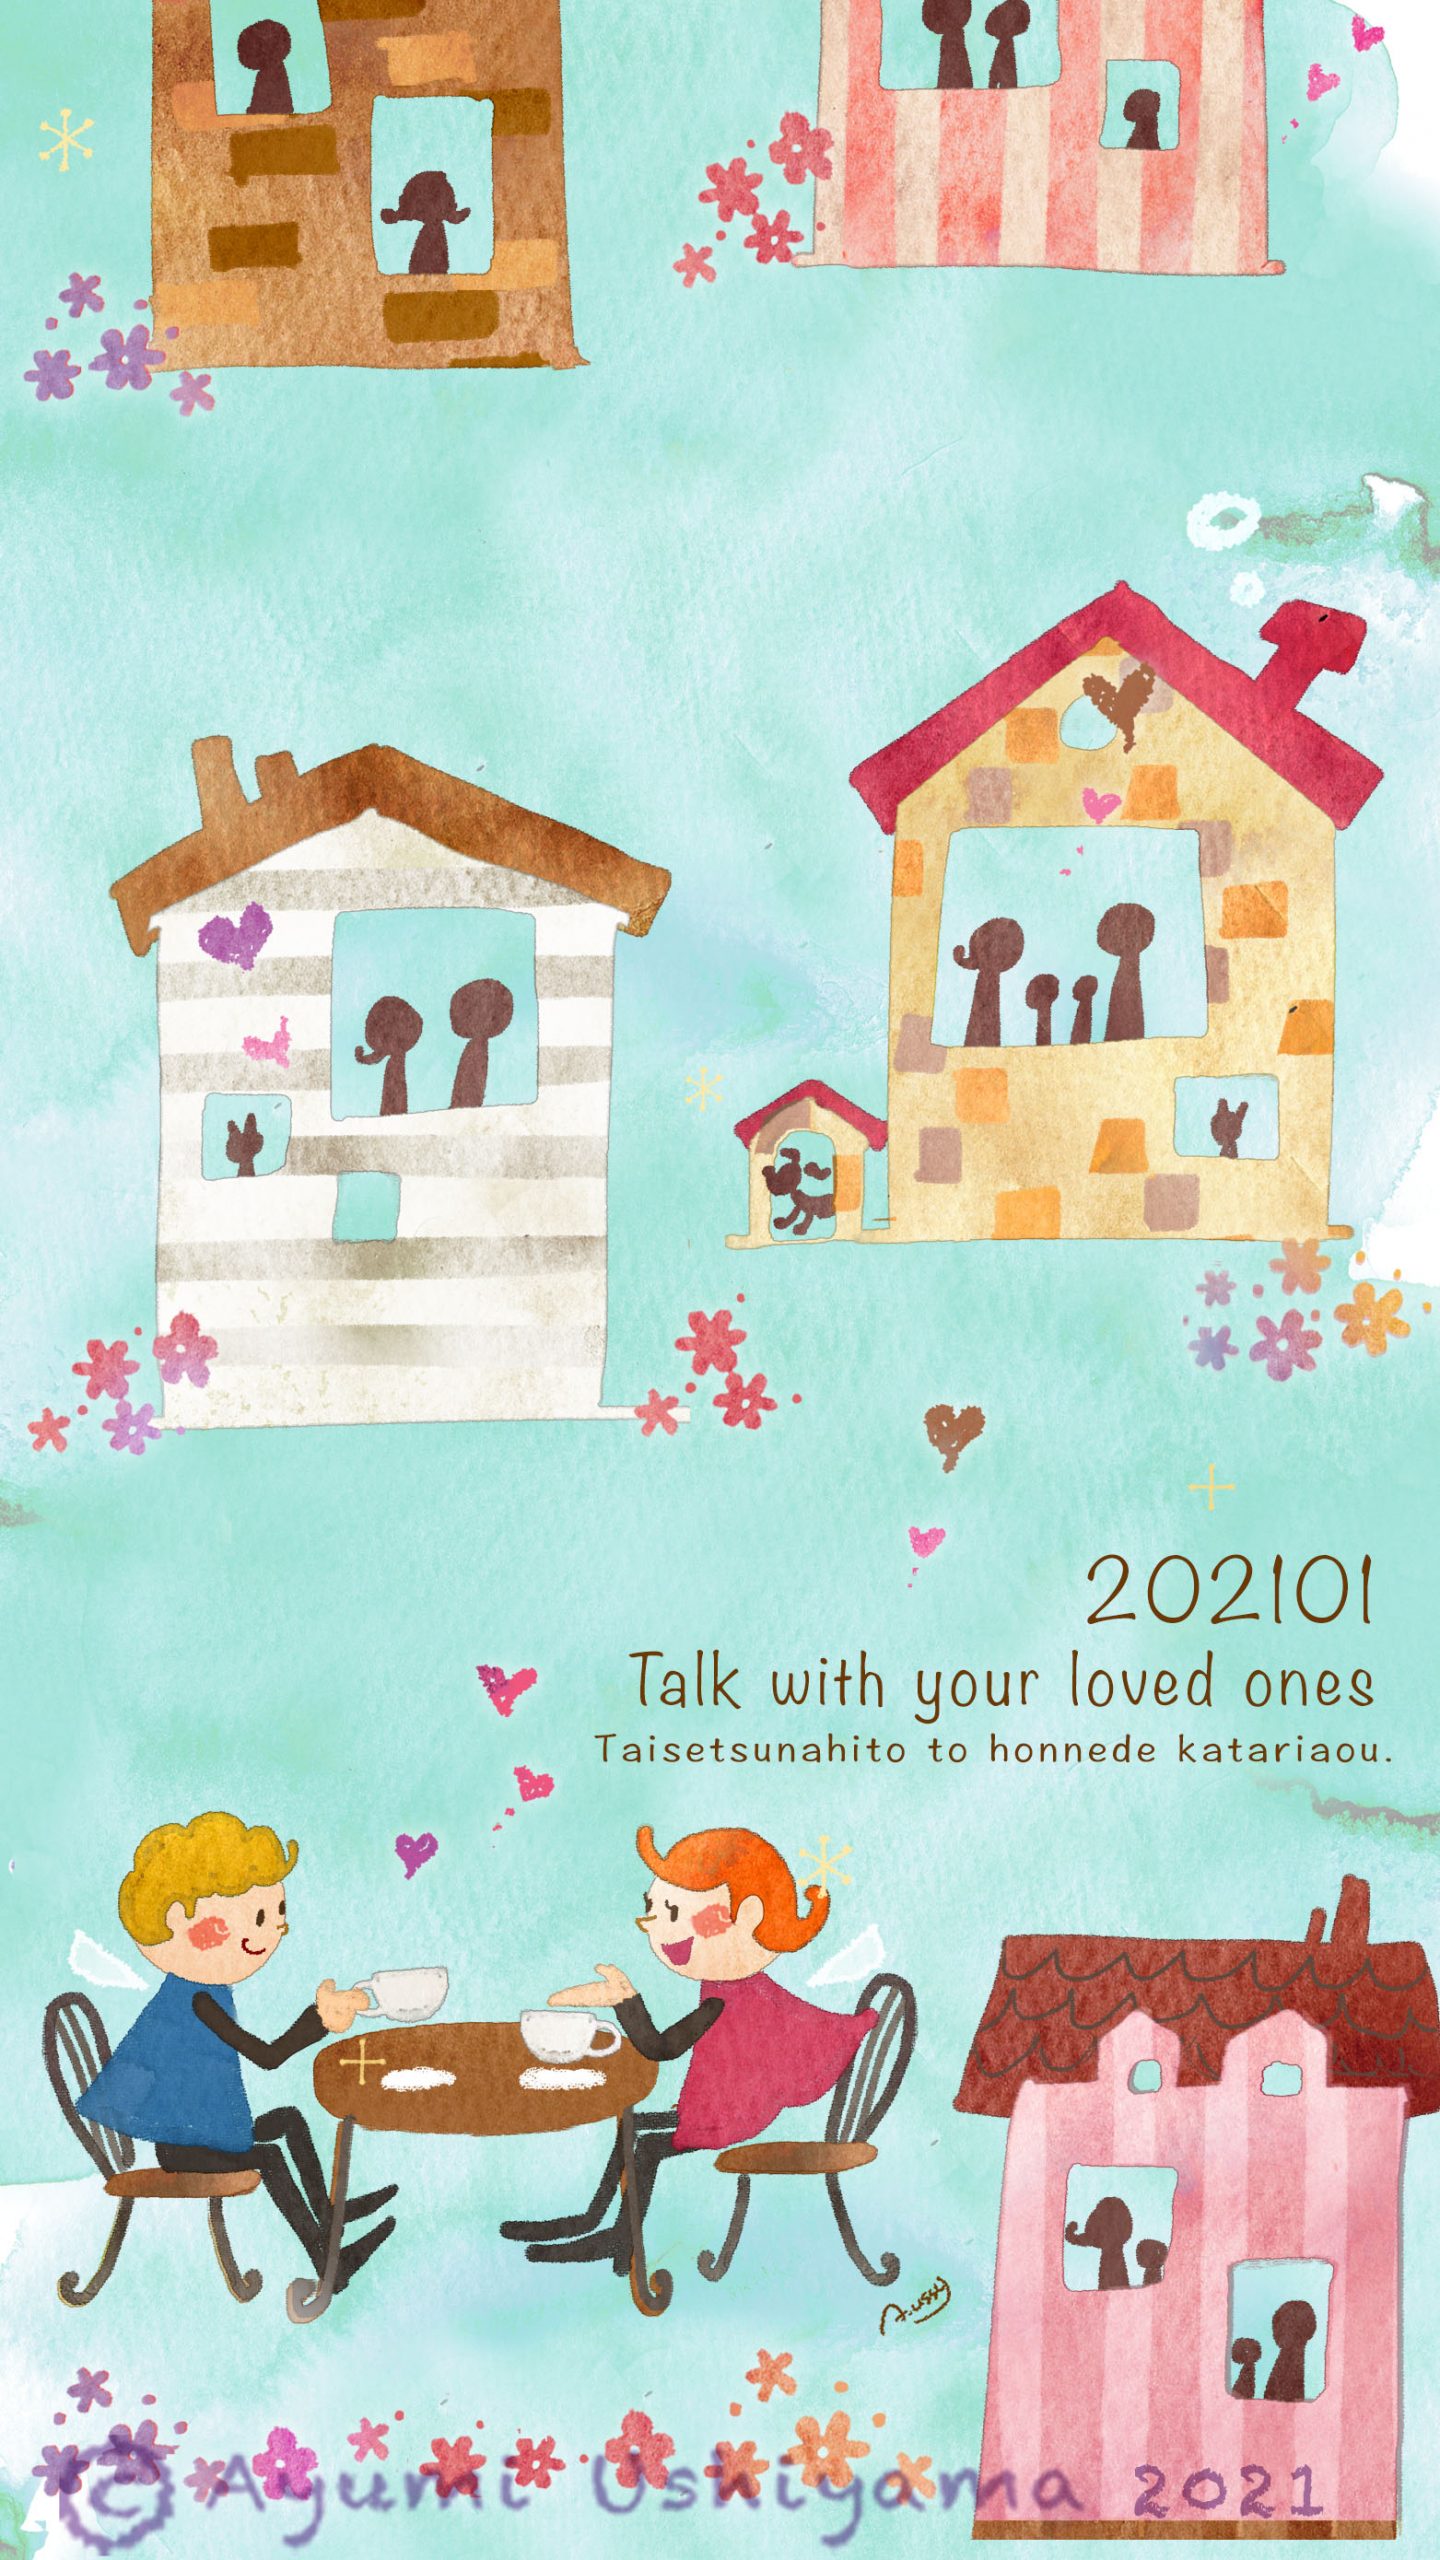 2021.01『Talk with your loved ones』